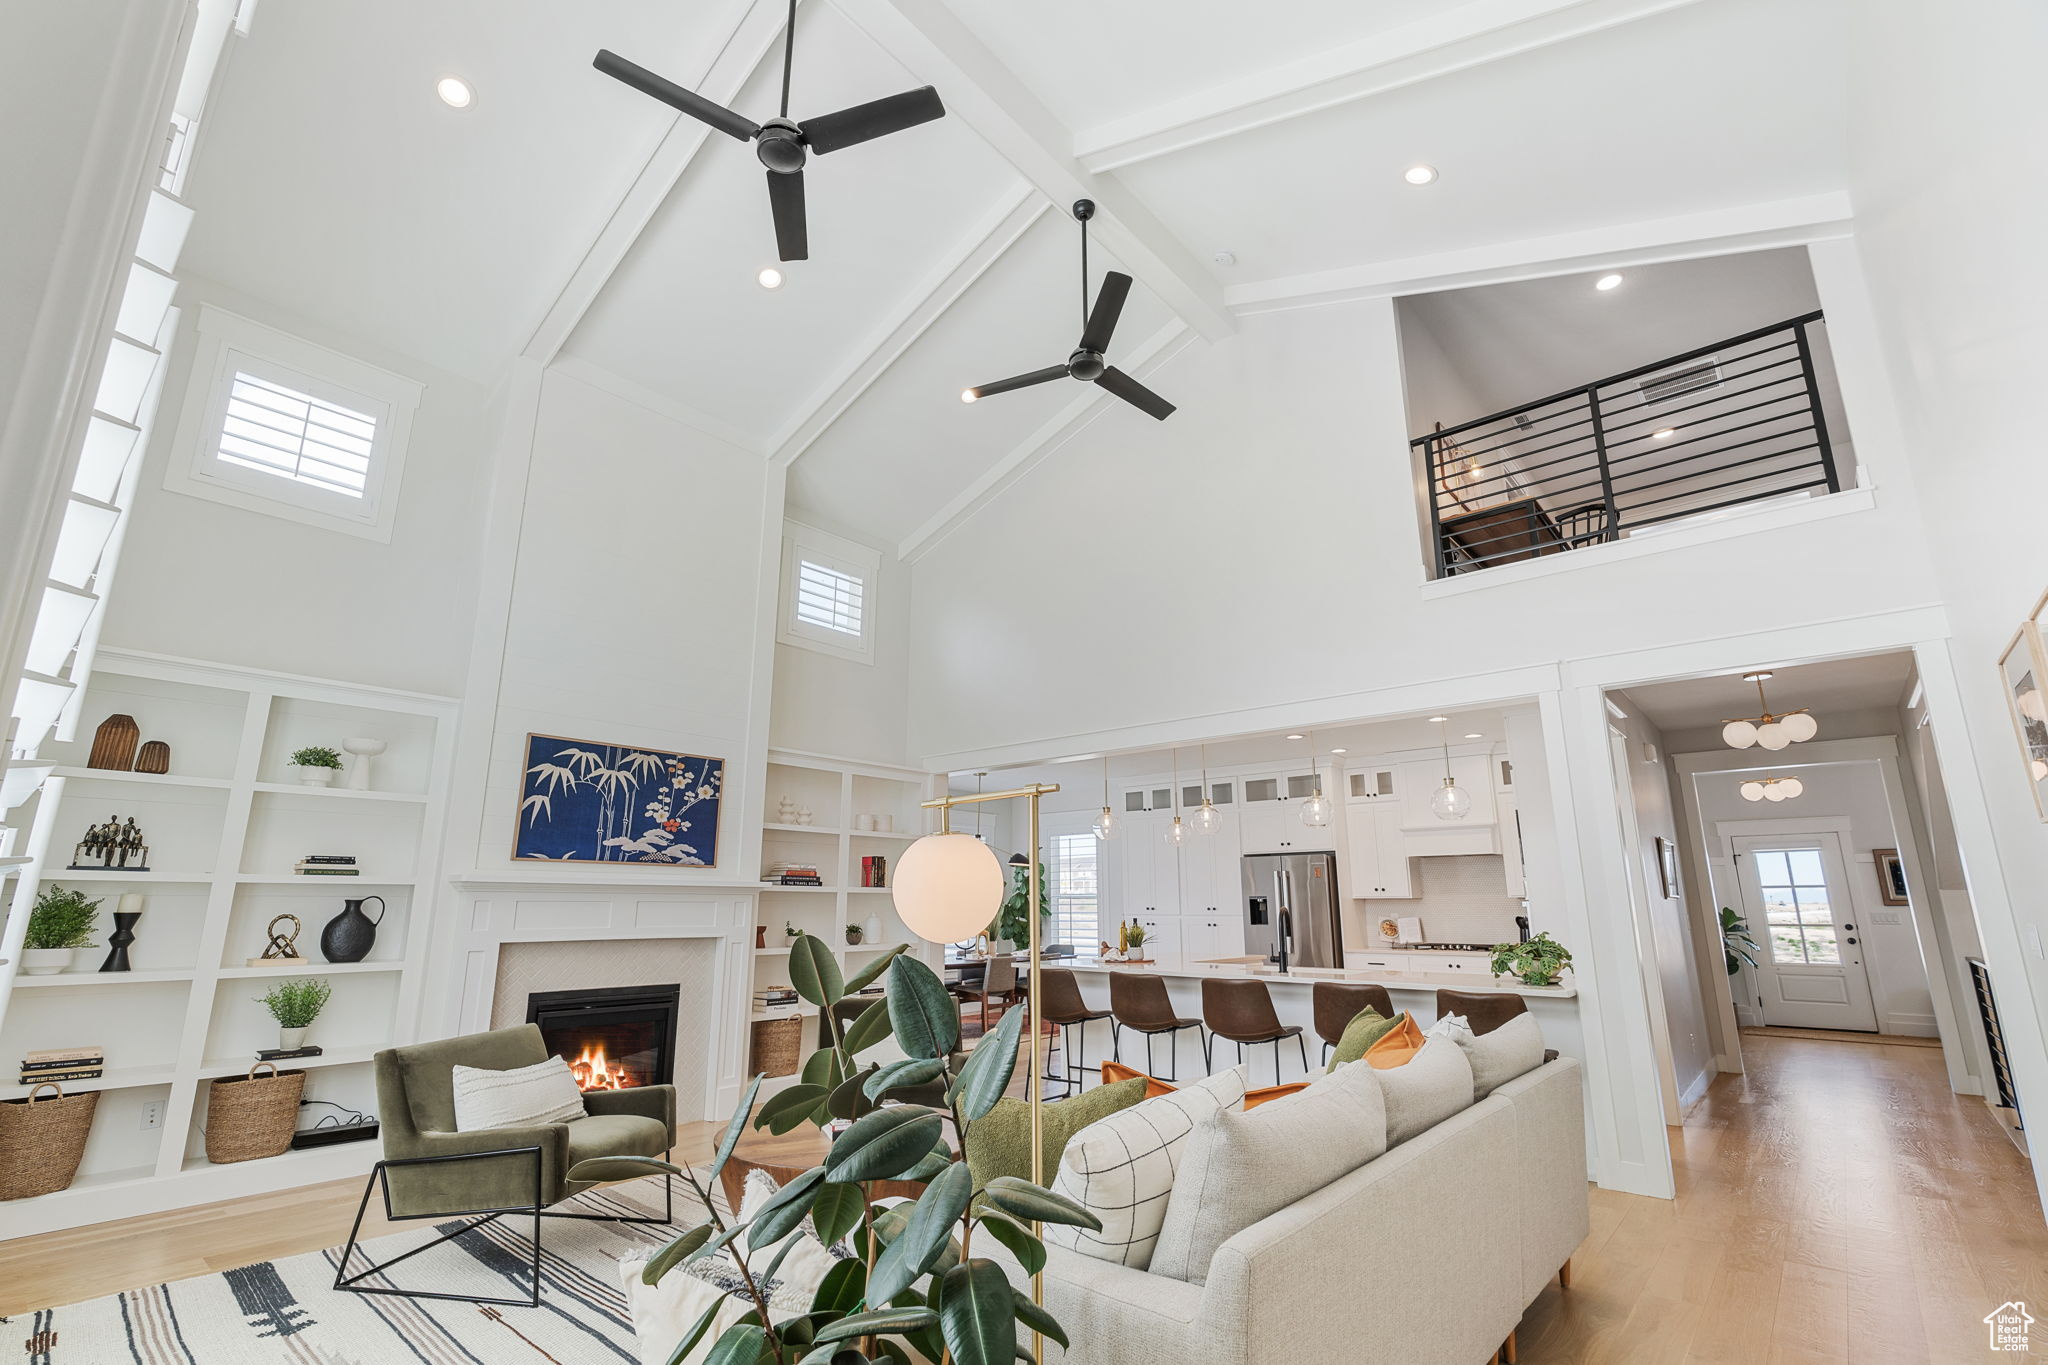 Living room with ceiling fans, built ins, high vaulted ceiling, white oak hardwood flooring, and beam ceiling.